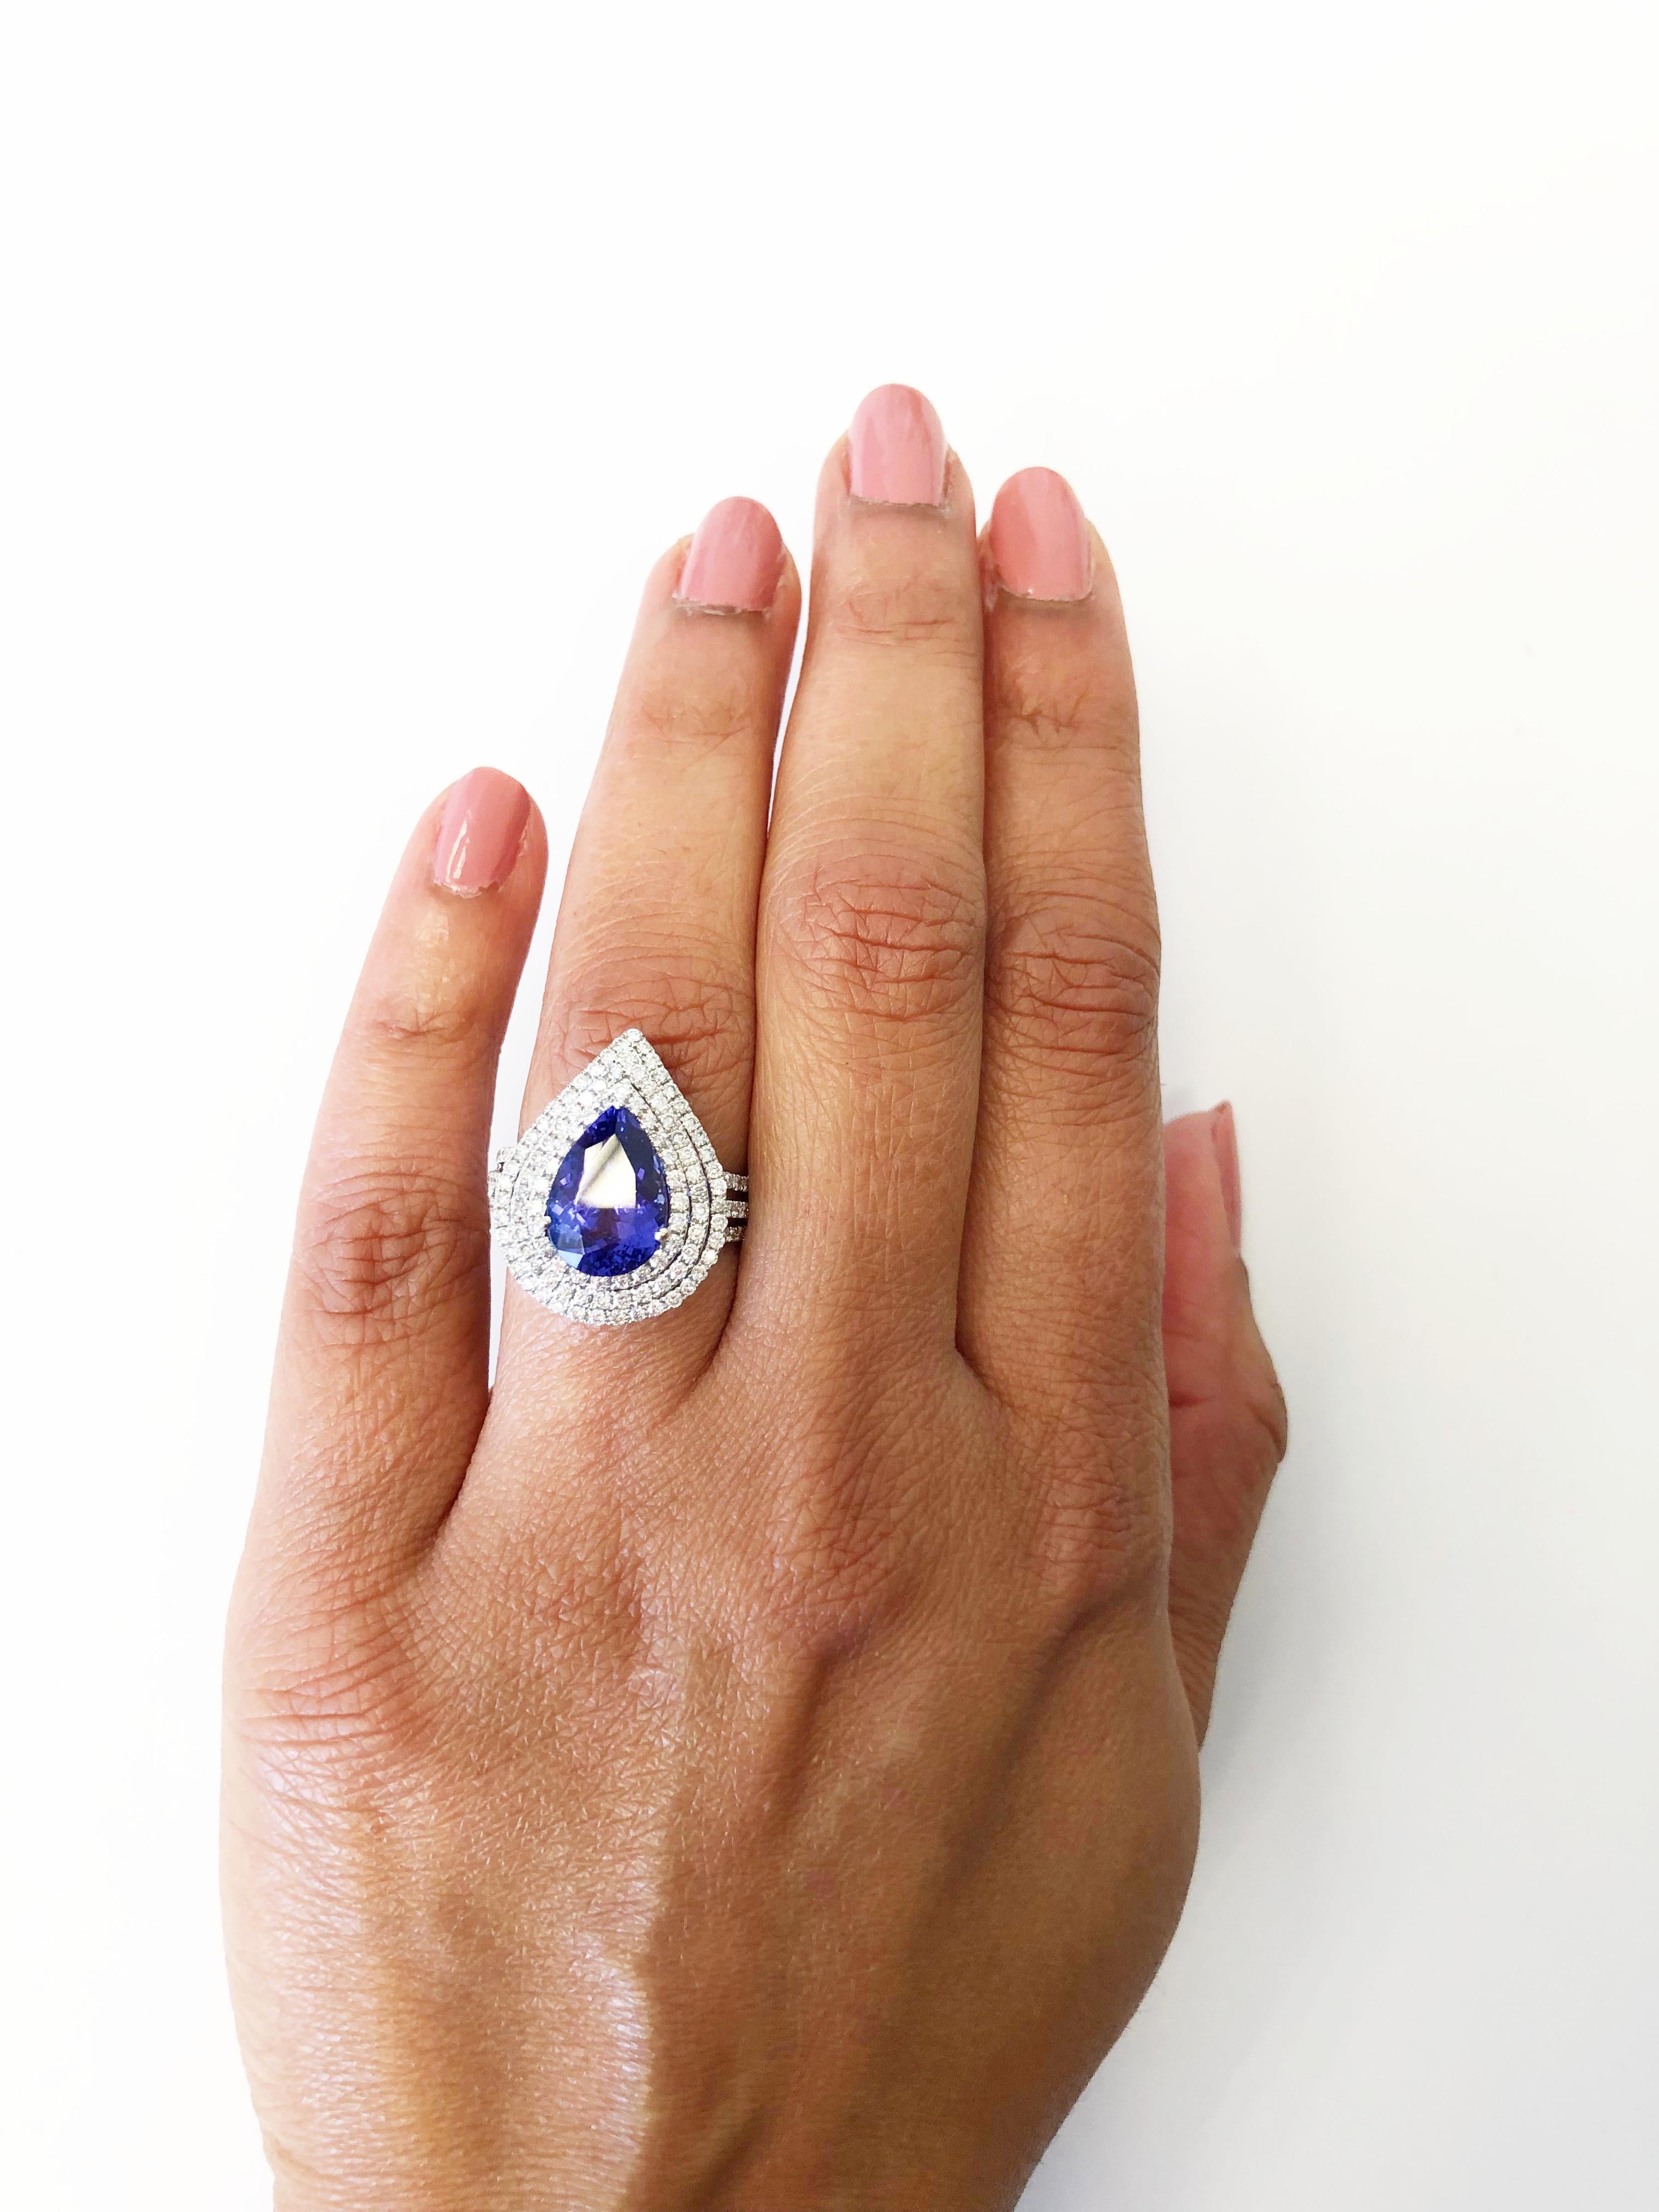 Beautiful deep blue tanzanite pear shape weighing 4.20 carats with 1.10 carats of good quality white diamond rounds. Handmade mounting in 18k white gold size 6.5.  Perfect as a cocktail ring or to wear on a daily basis.


 